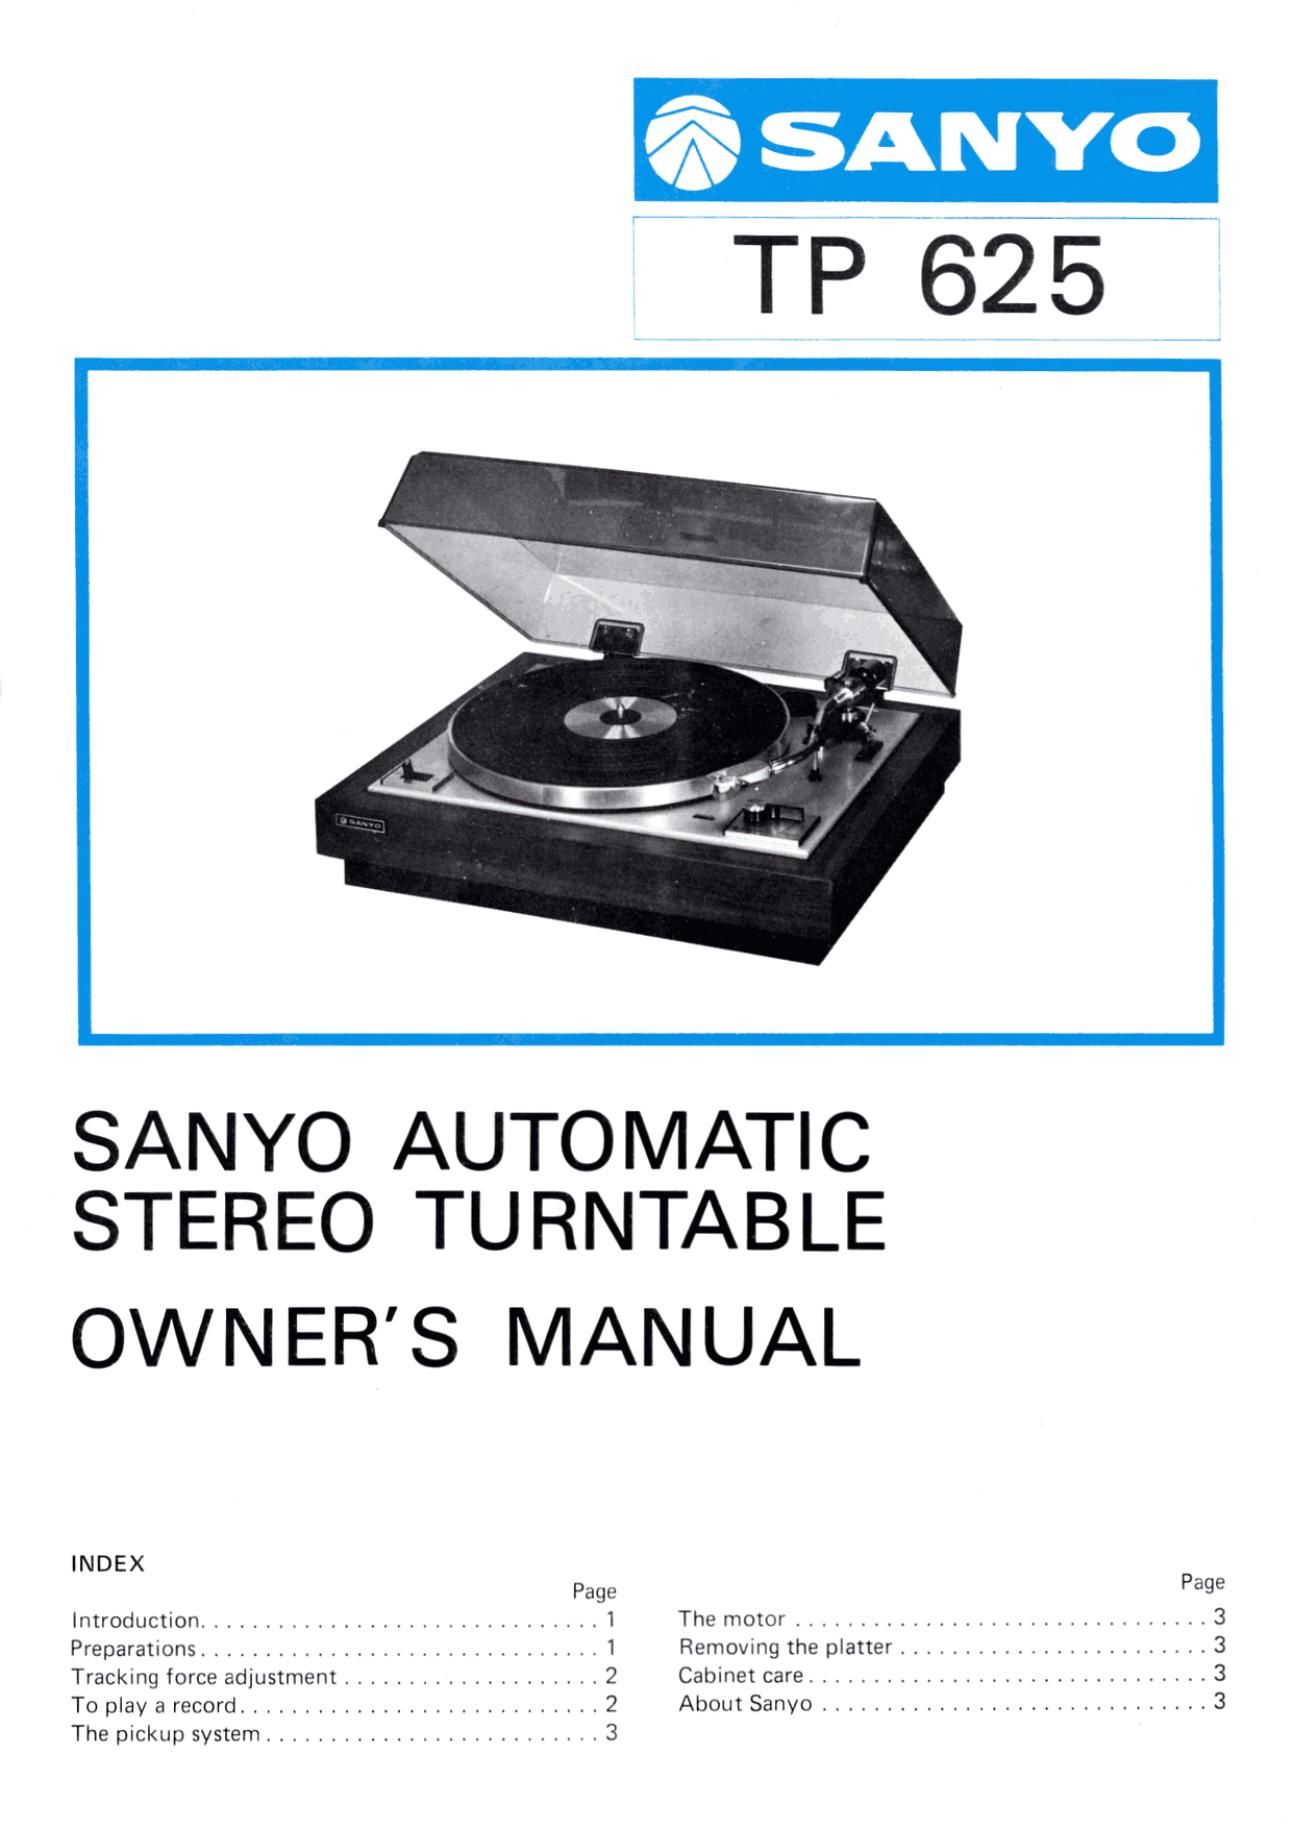 Sanyo TP 625 Owners Manual